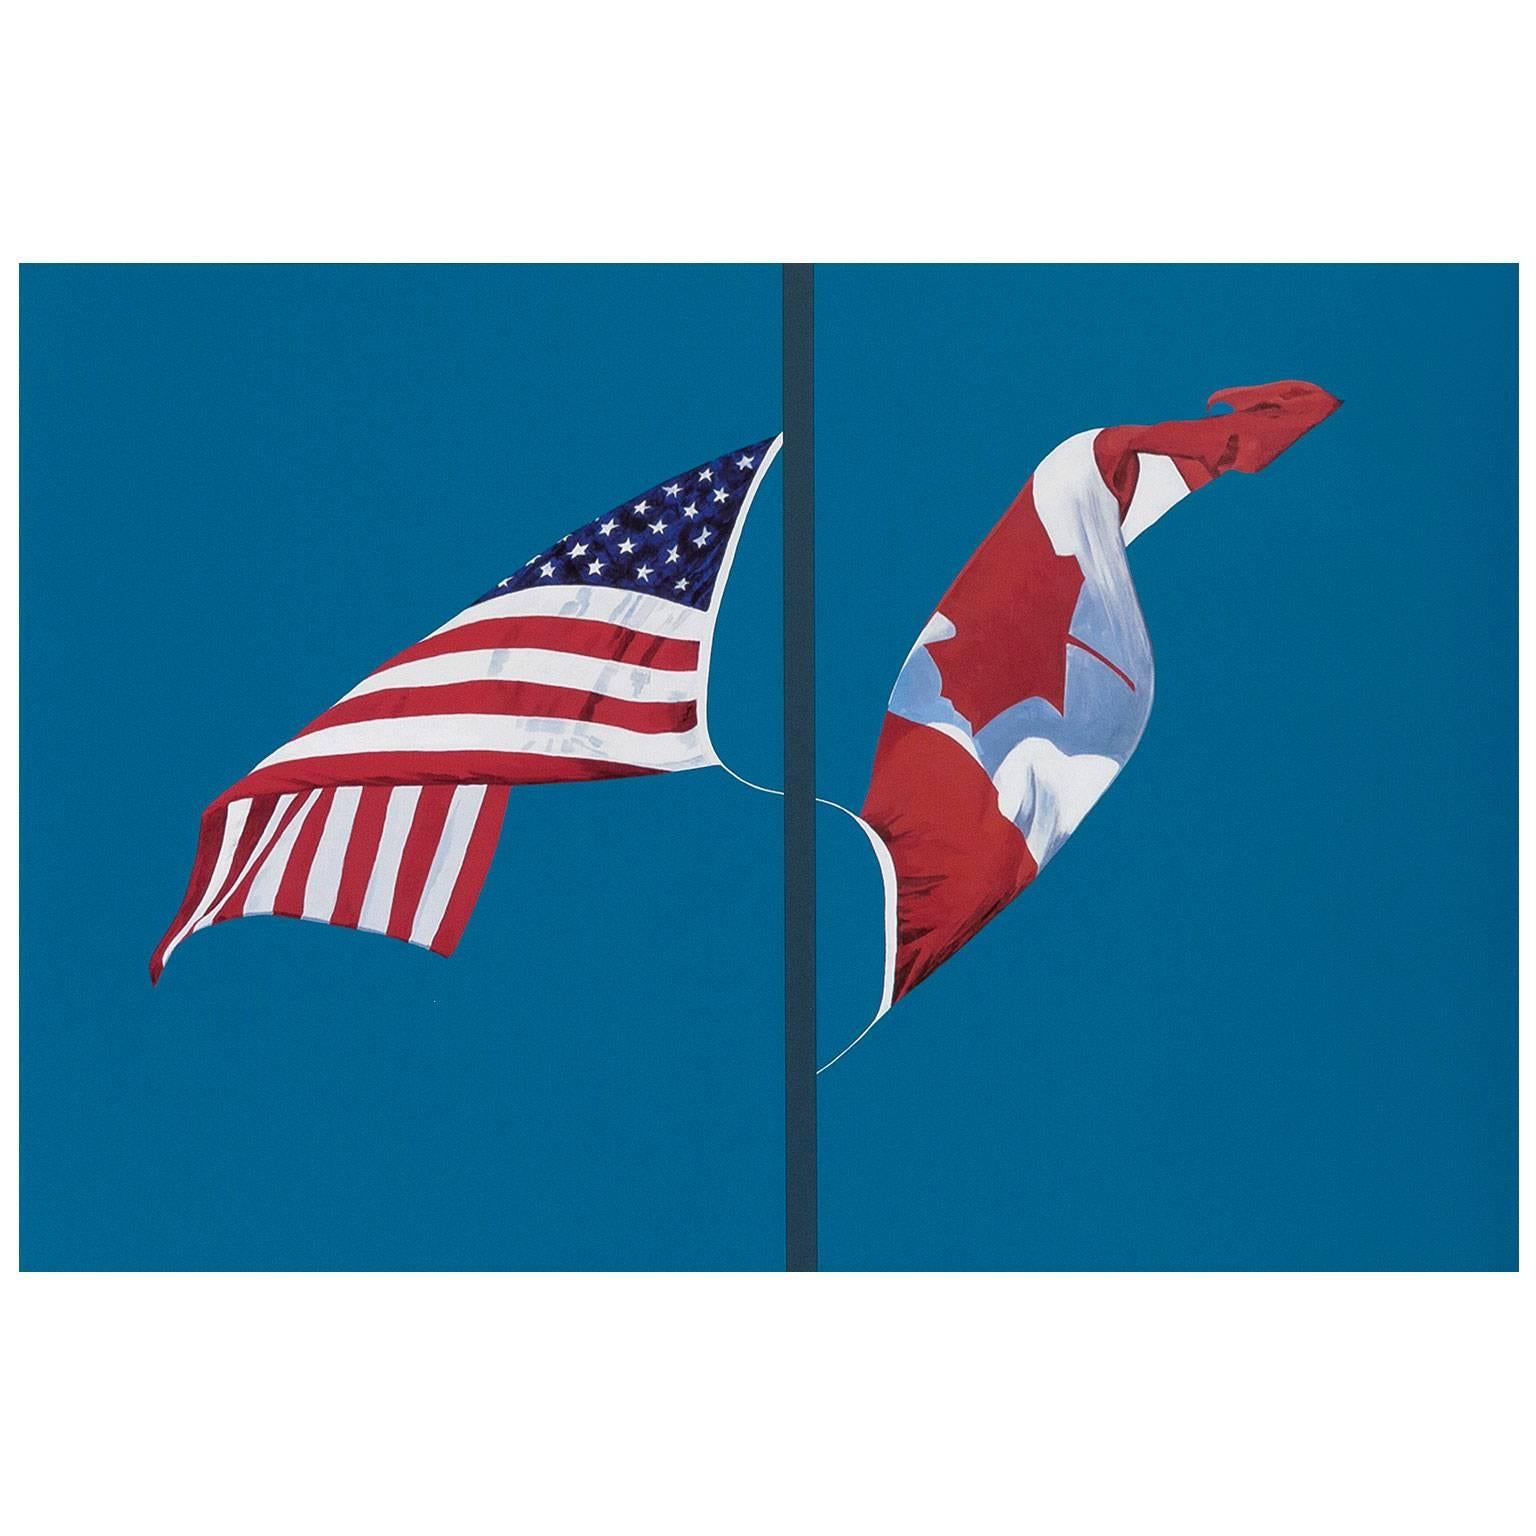 Side By Side - Print by Charles Pachter